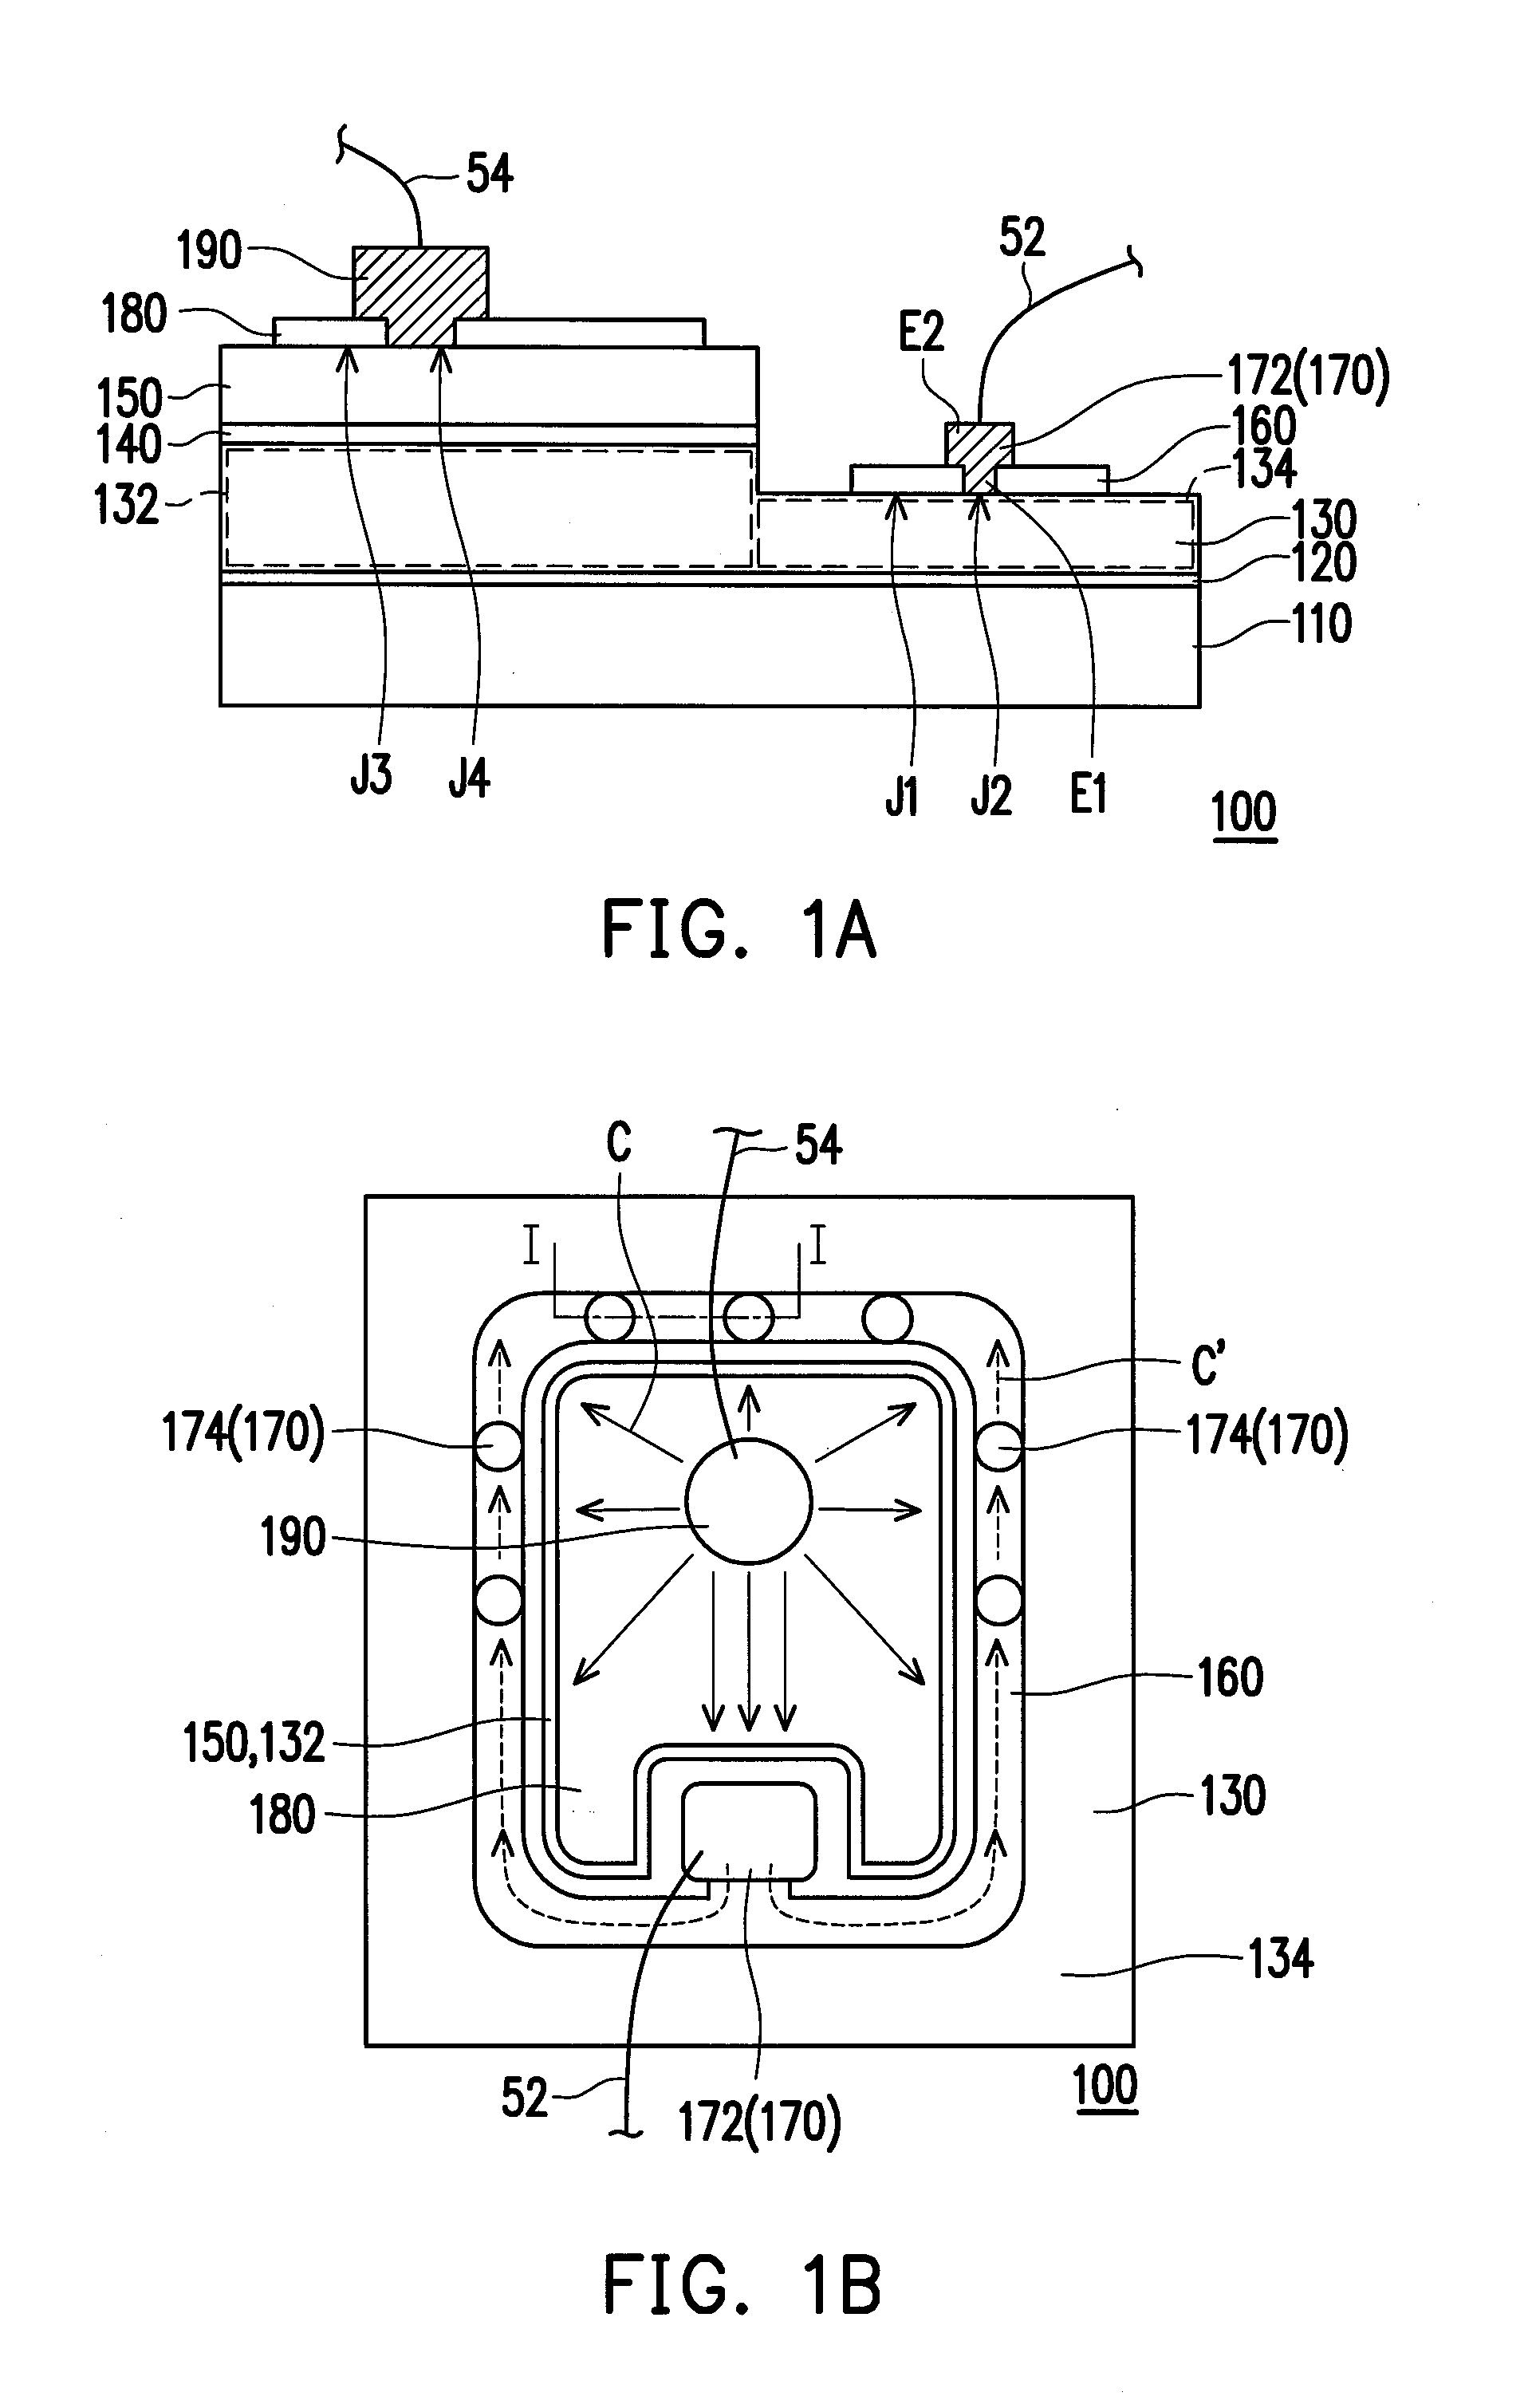 Semiconductor light-emitting structure